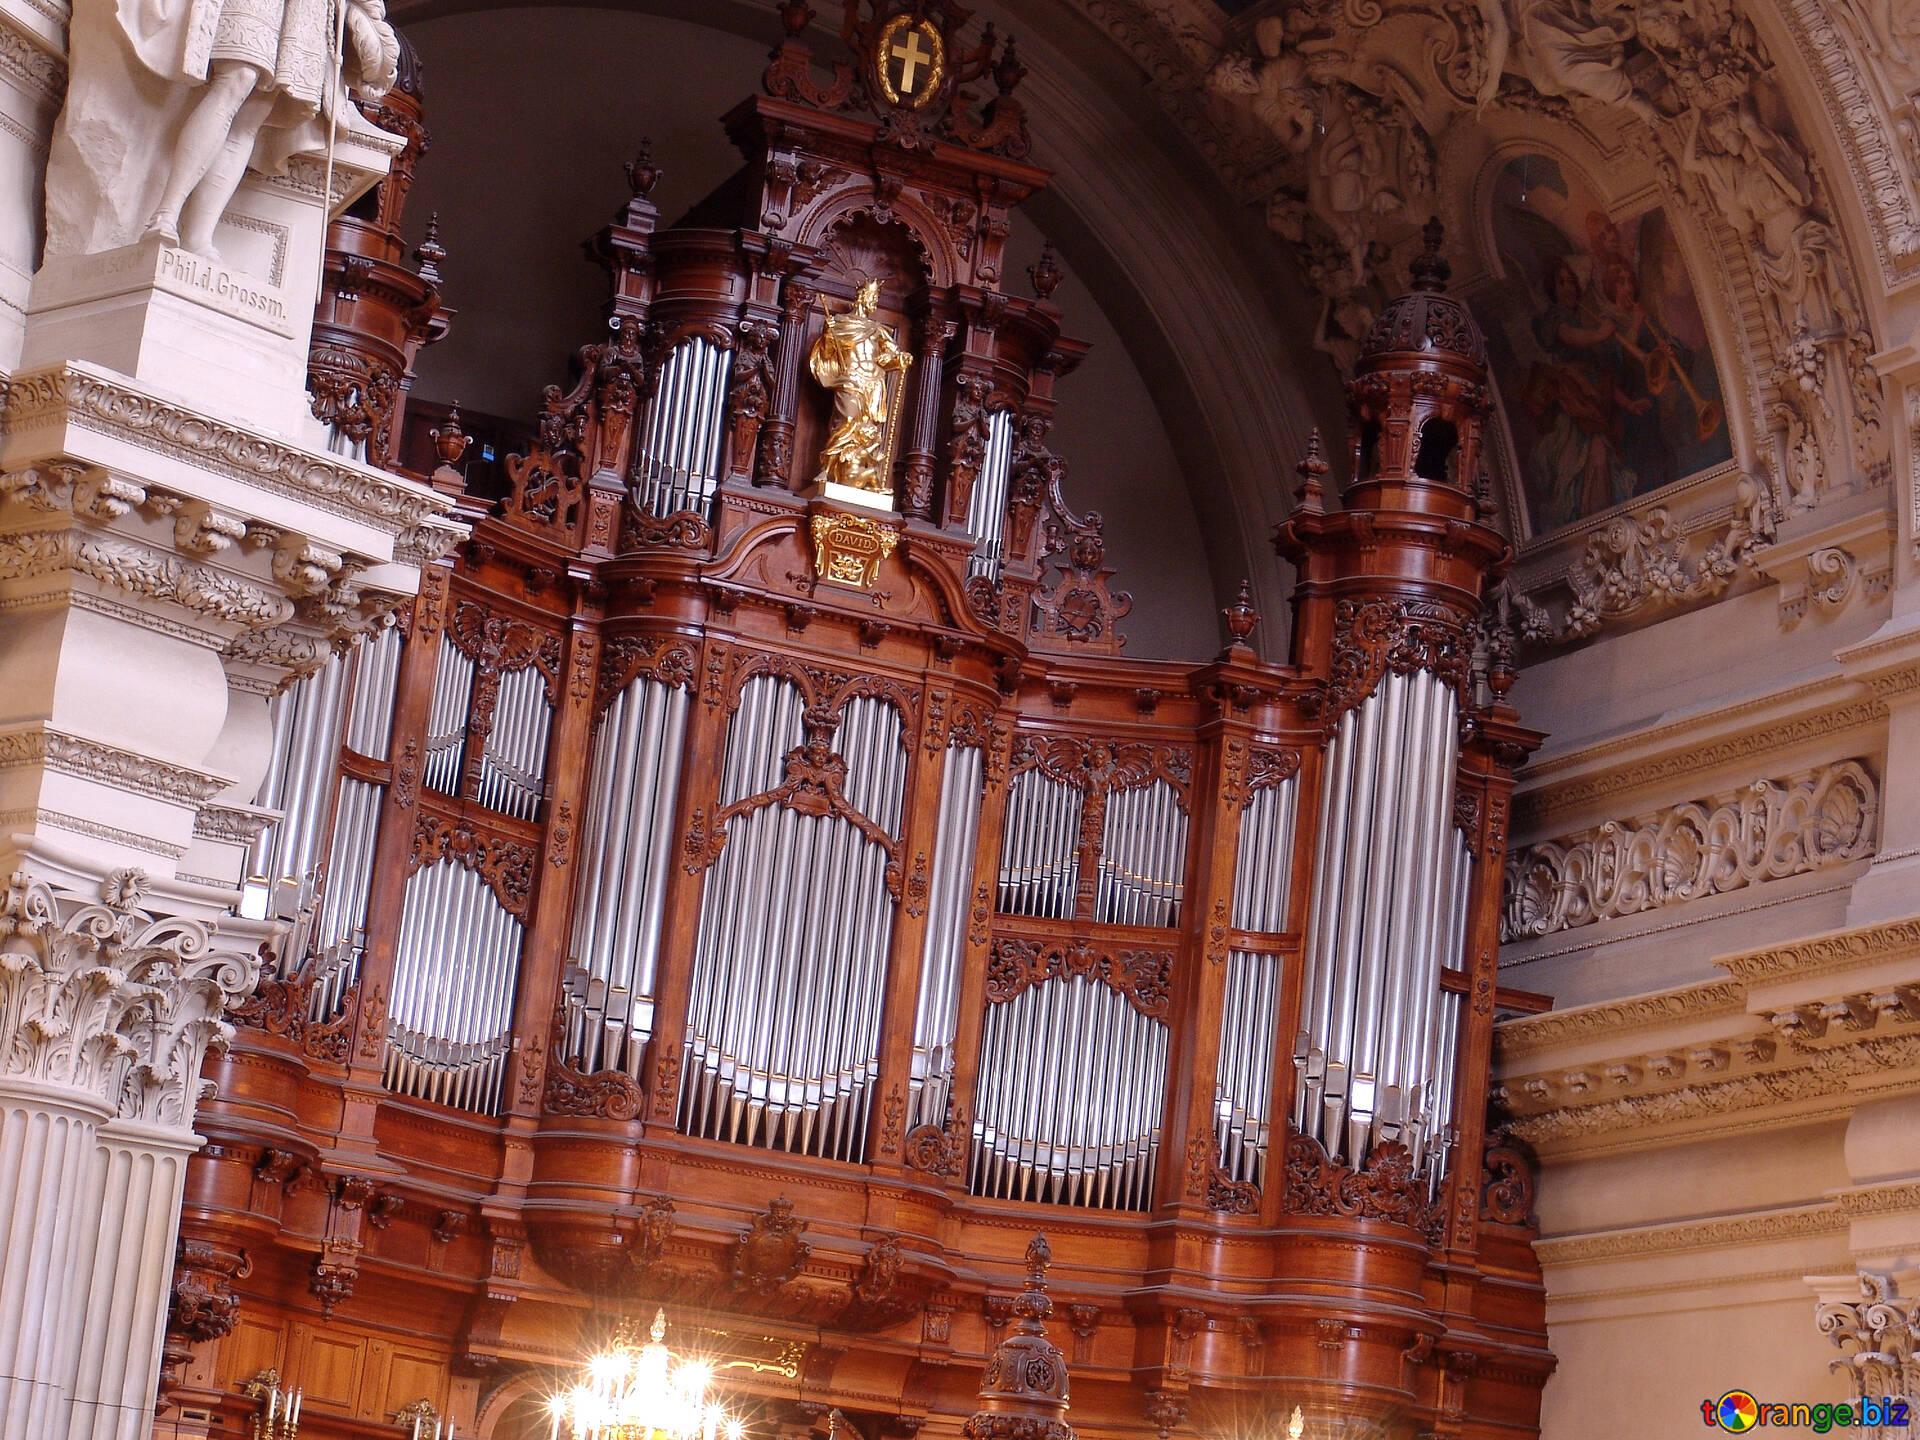 1920x1440 Musical instruments pipe organ image organ music images music &acirc;&#132;&#150; 7440 | ~ free pics on cc-by license